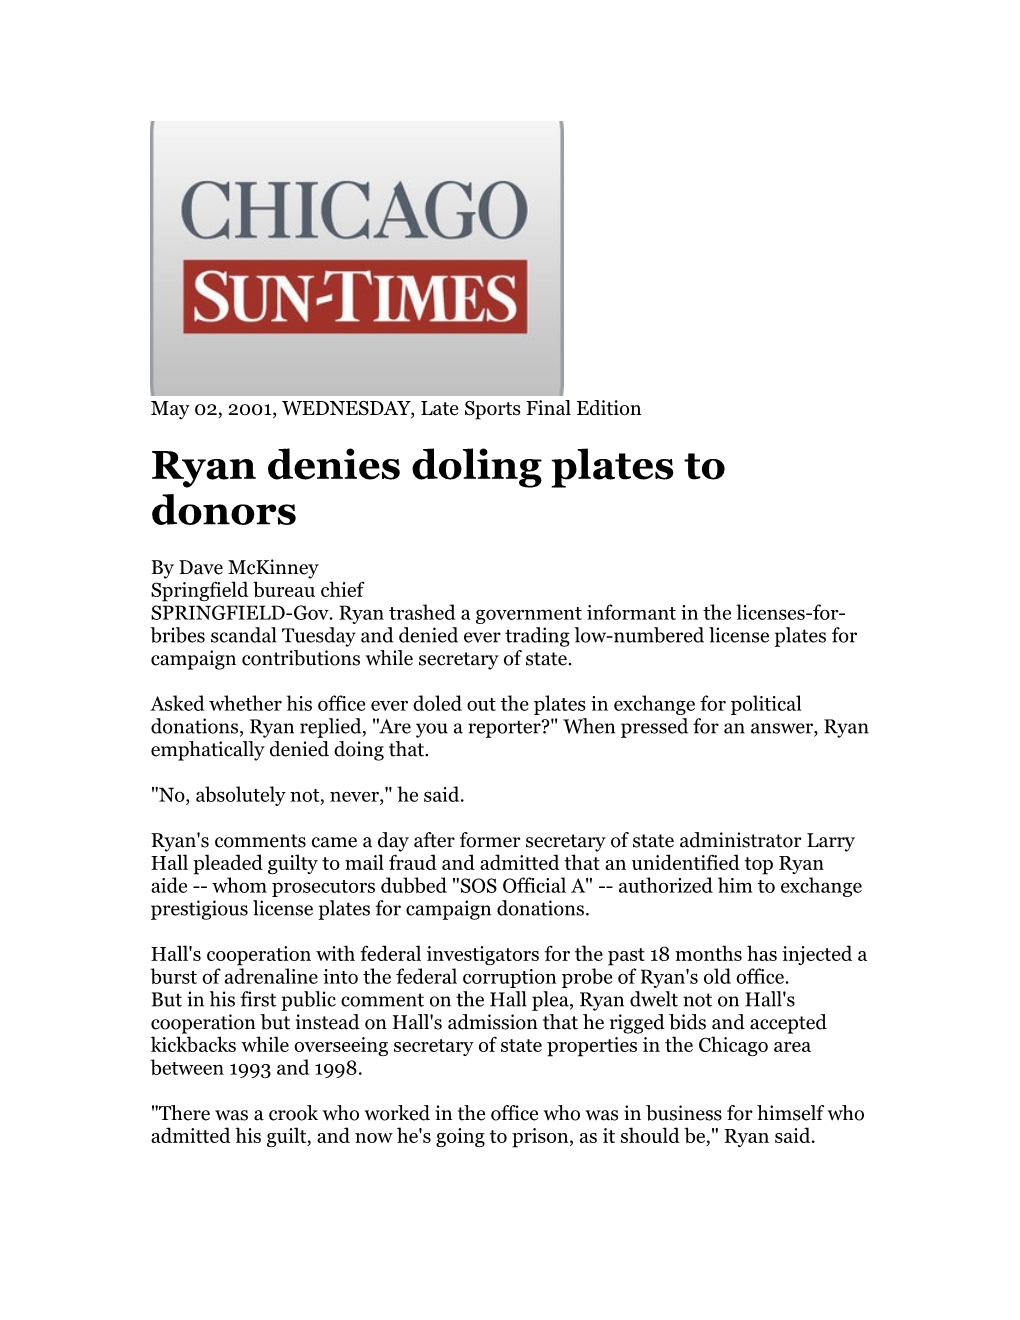 Ryan Denies Doling Plates to Donors